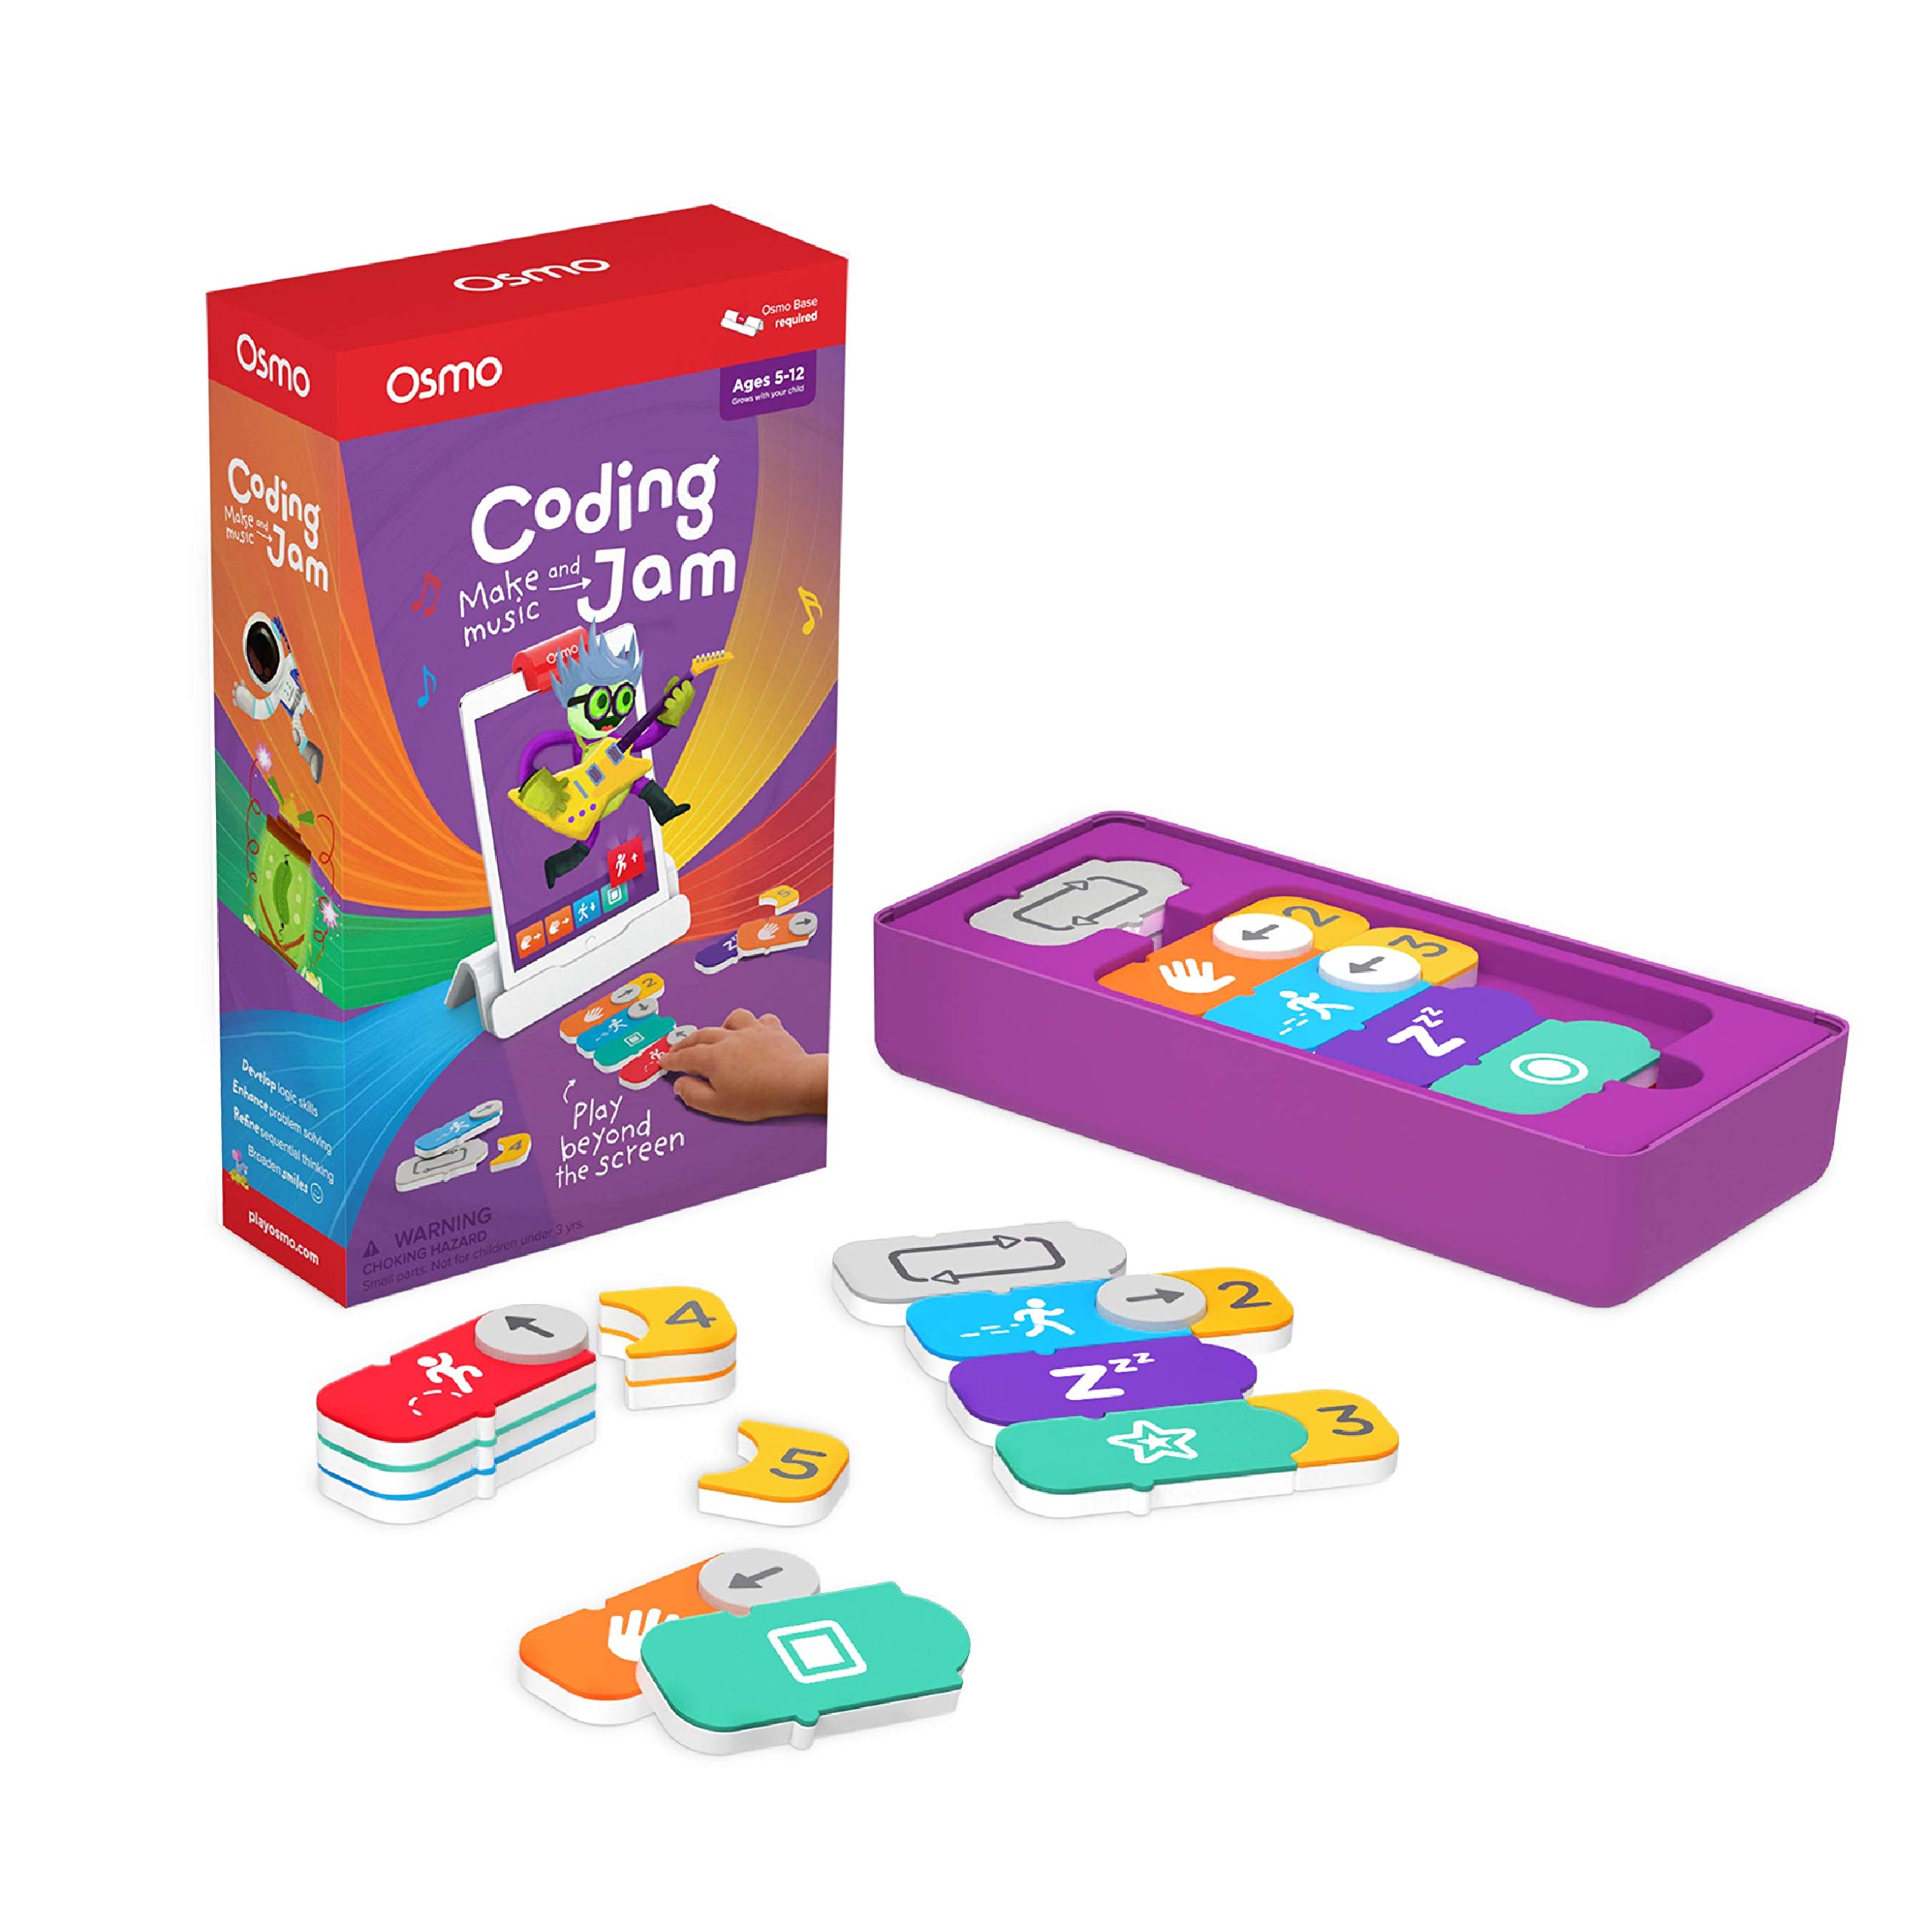 Book Cover Osmo - Coding Jam - Ages 6-12 - Music Creation, Coding & Problem Solving - For iPad or Fire Tablet (Osmo Base Required) (Discontinued by Manufacturer)